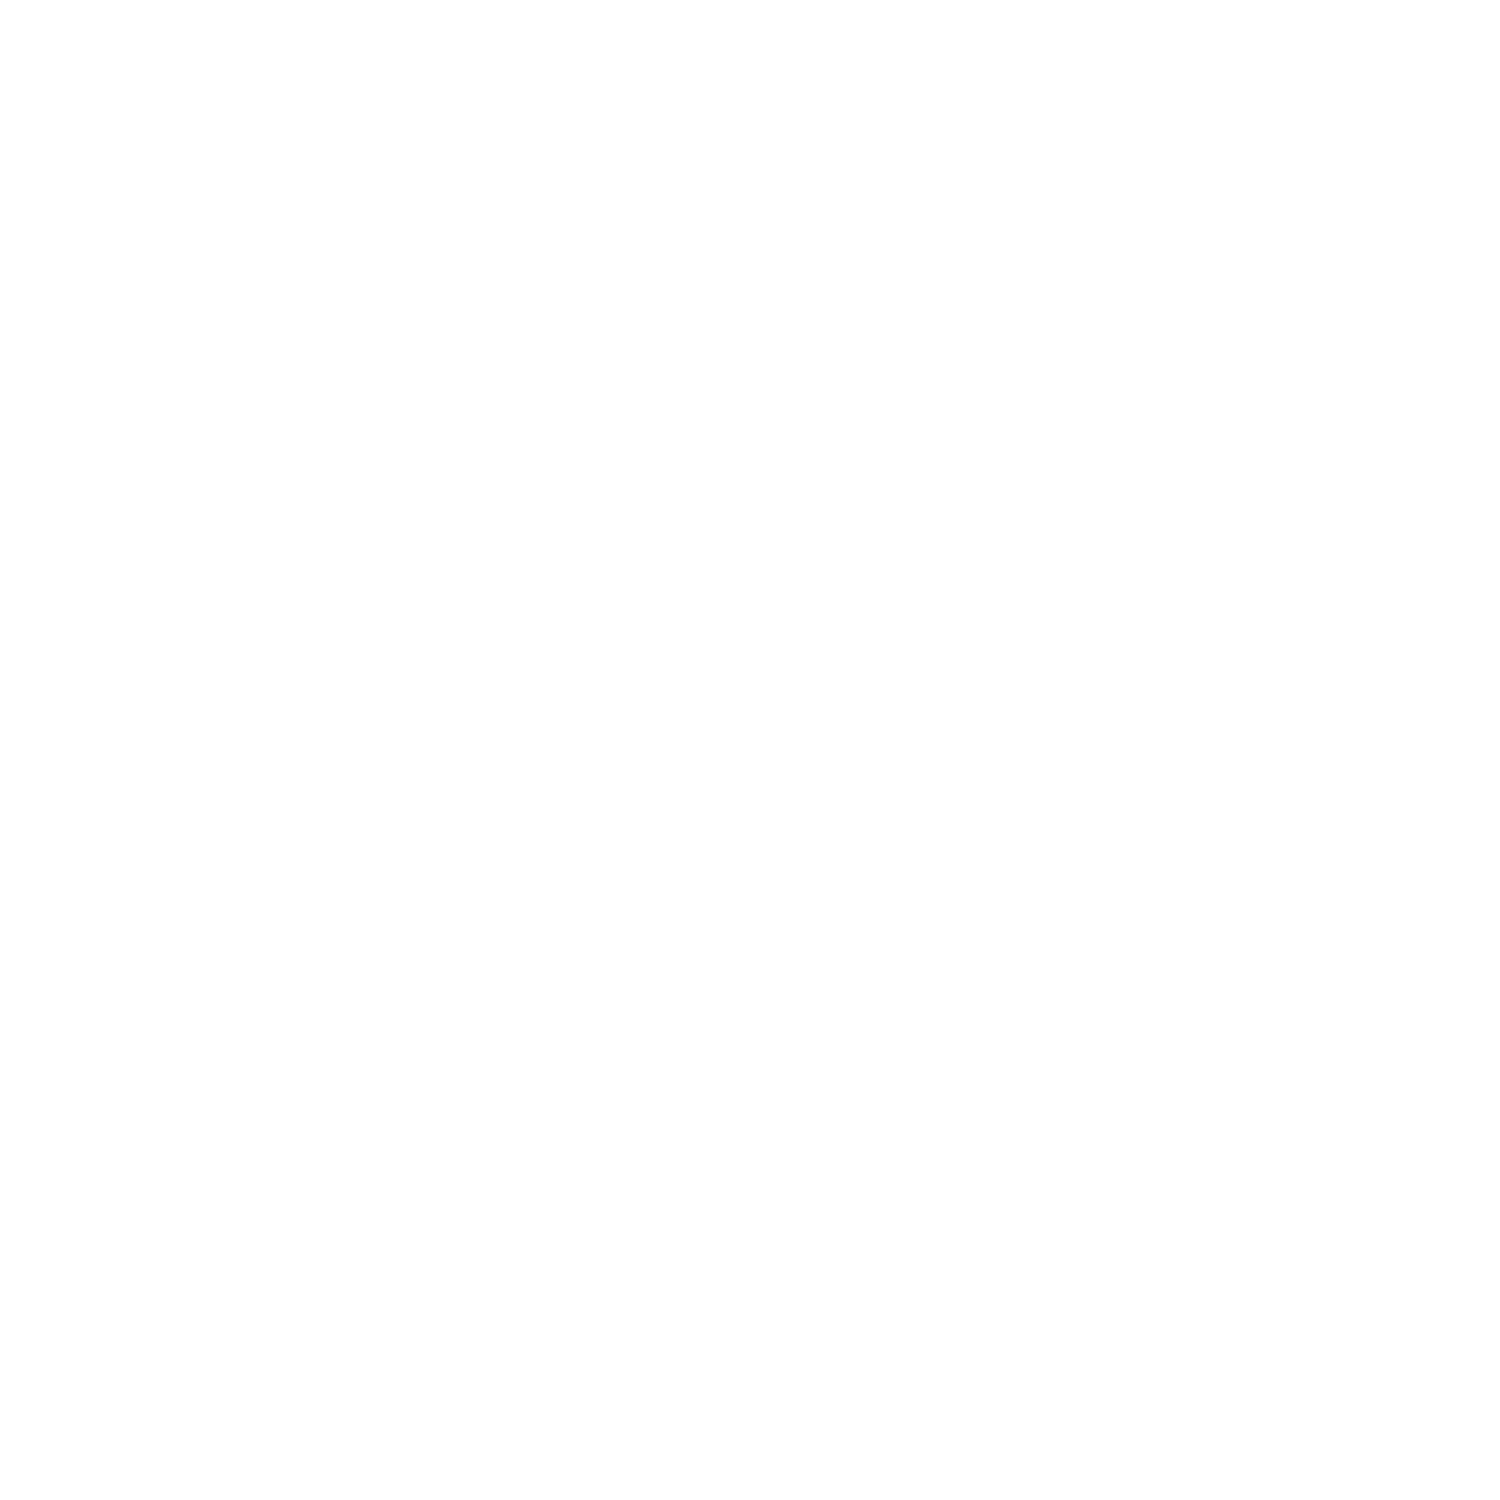 Trg Arts Trg Arts Is An Industry Leader In Arts Analytics Loyalty Development And Pricing Strategies We House And Study The Largest Database Of Arts Consumption Data In The World